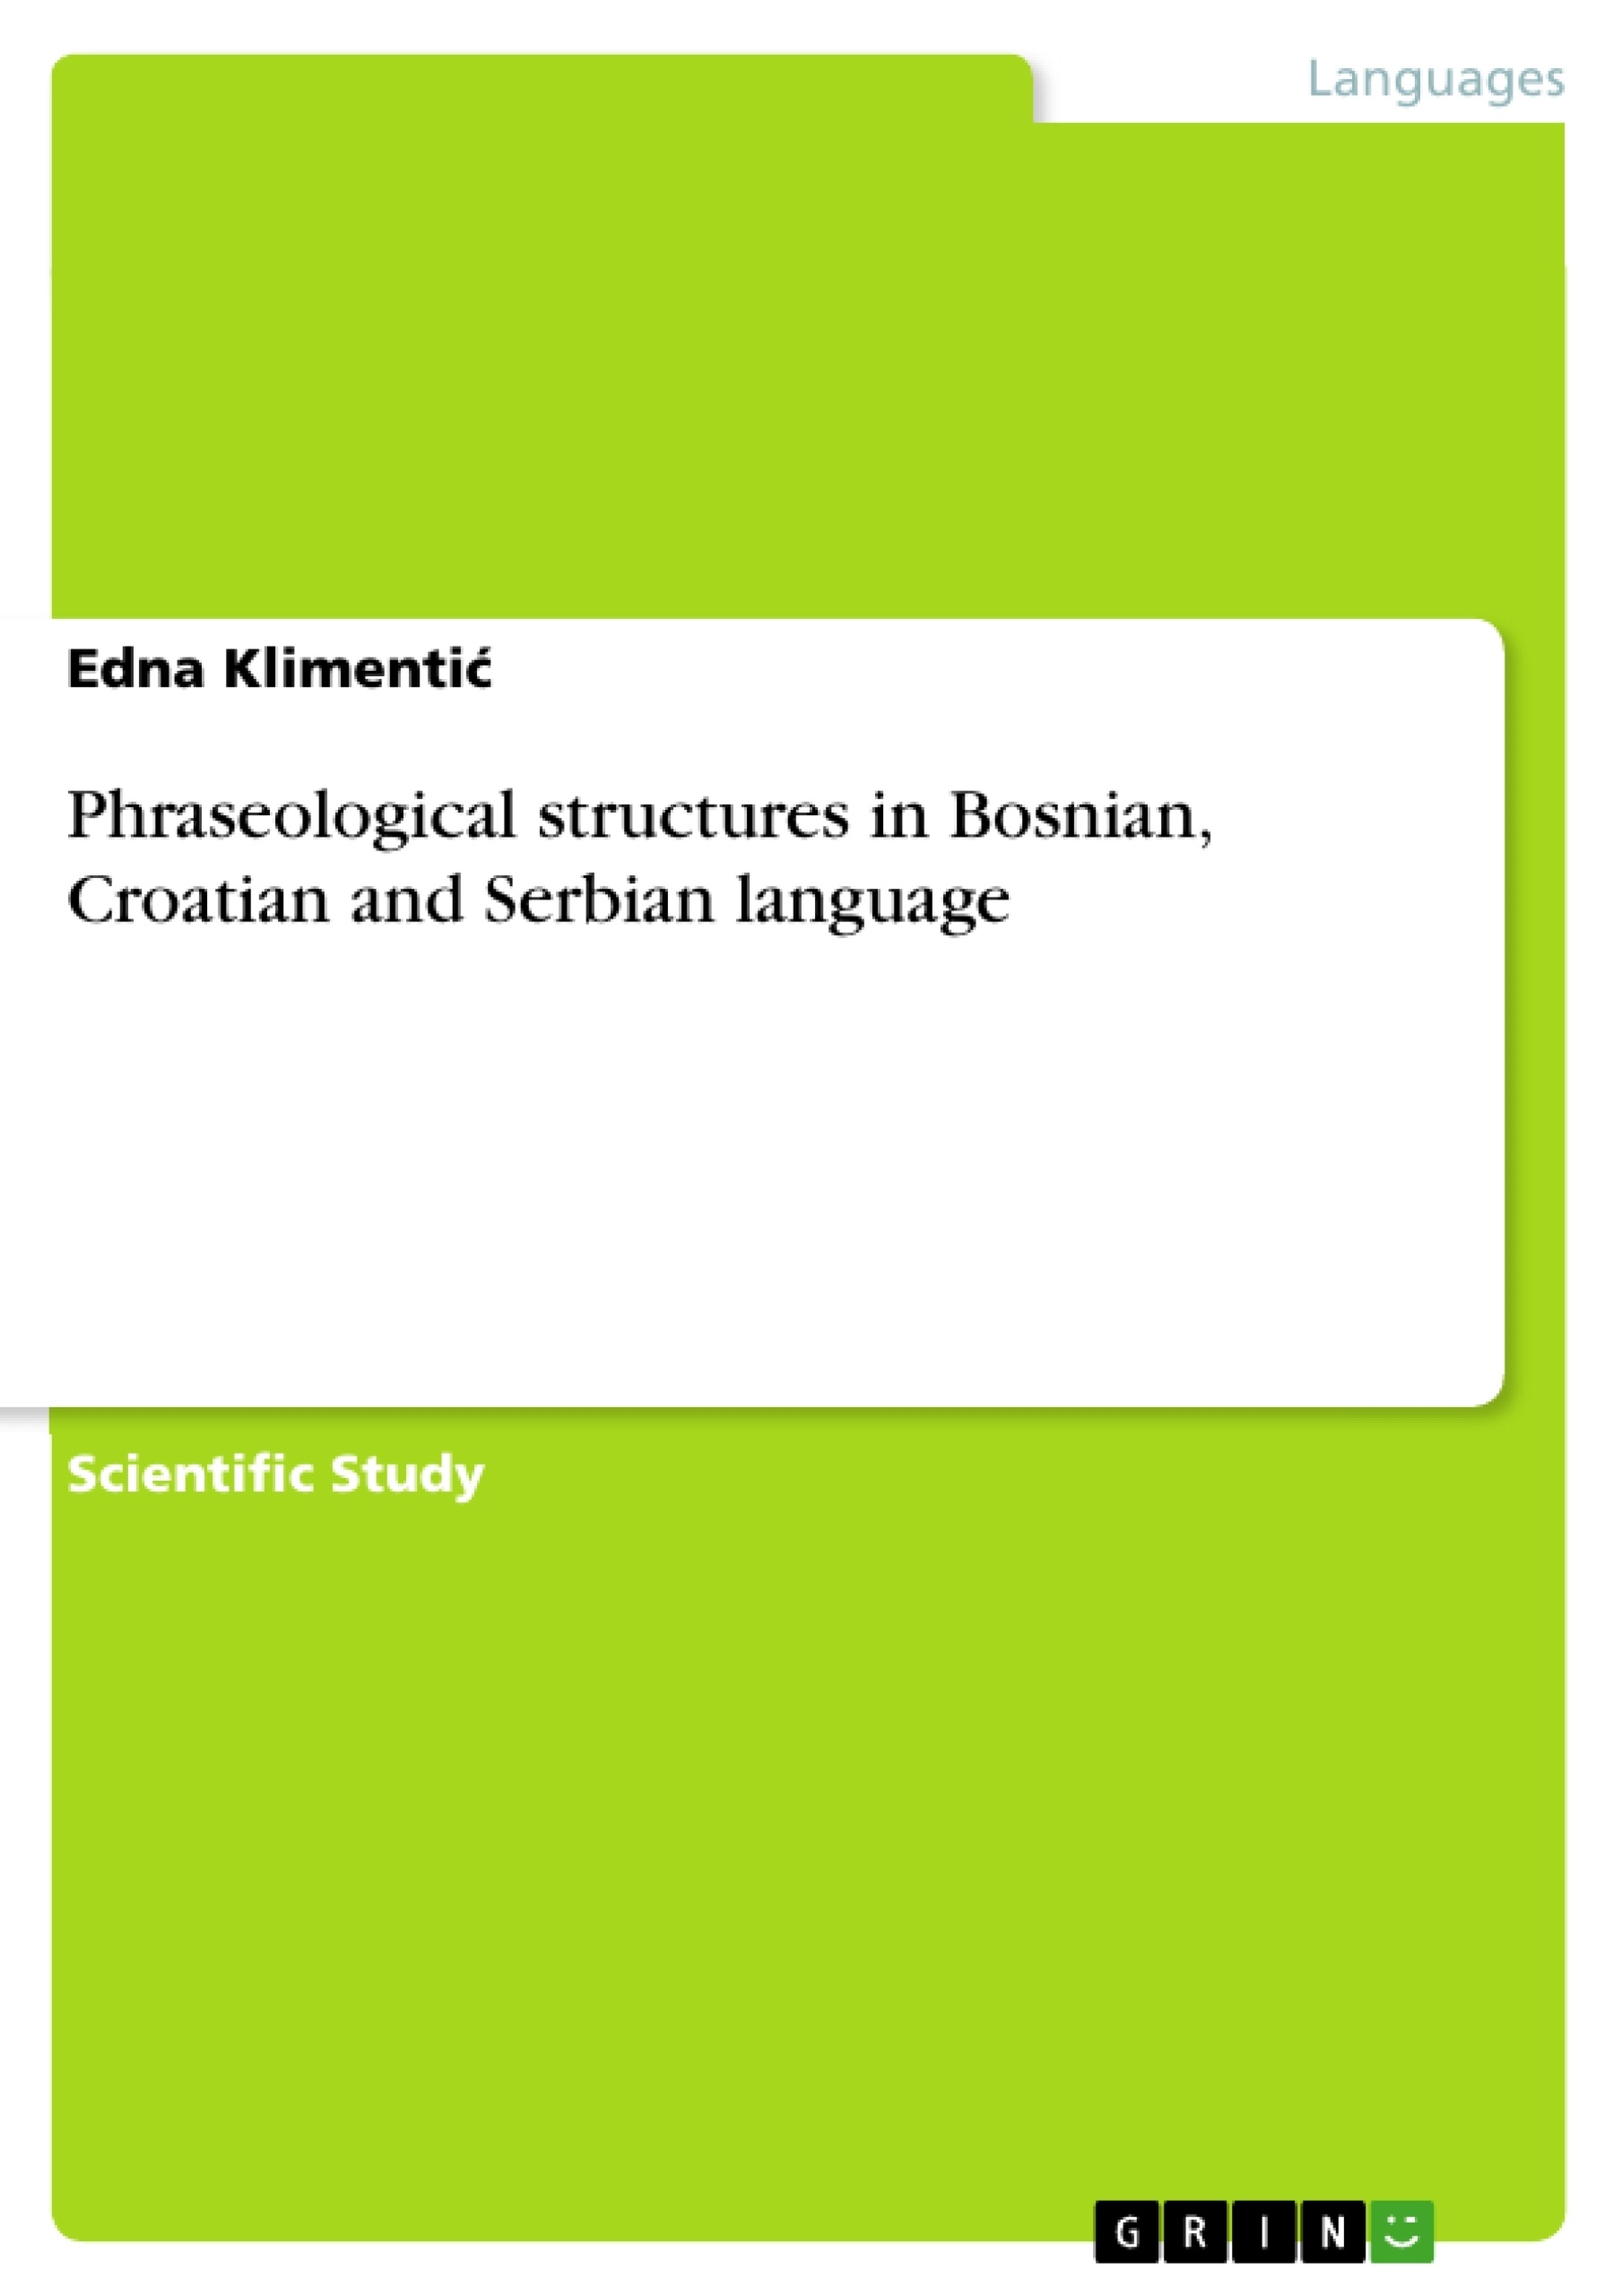 Title: Phraseological structures in Bosnian, Croatian and Serbian language